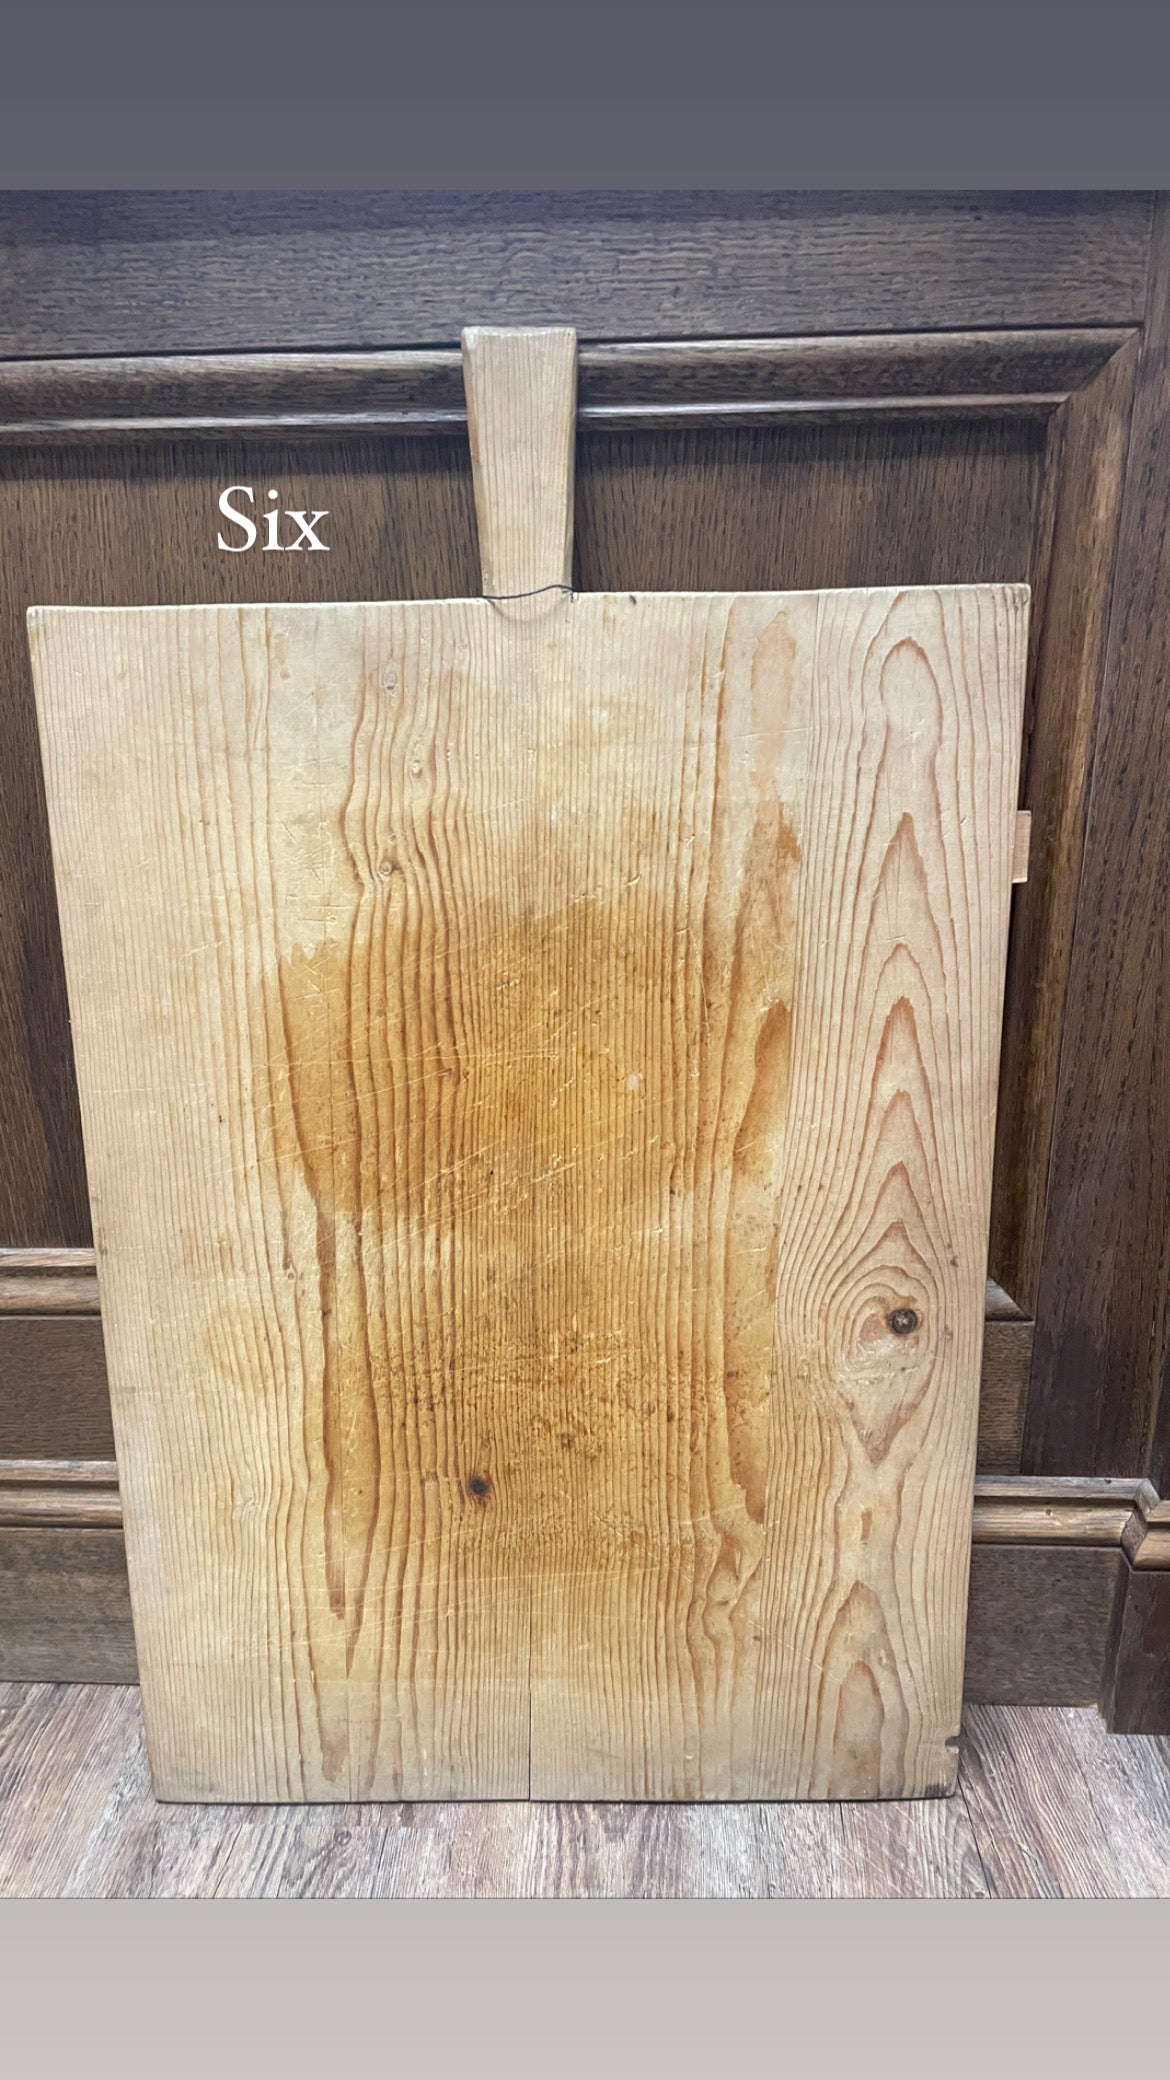 Rustic wooden serving board - various styles & sizes